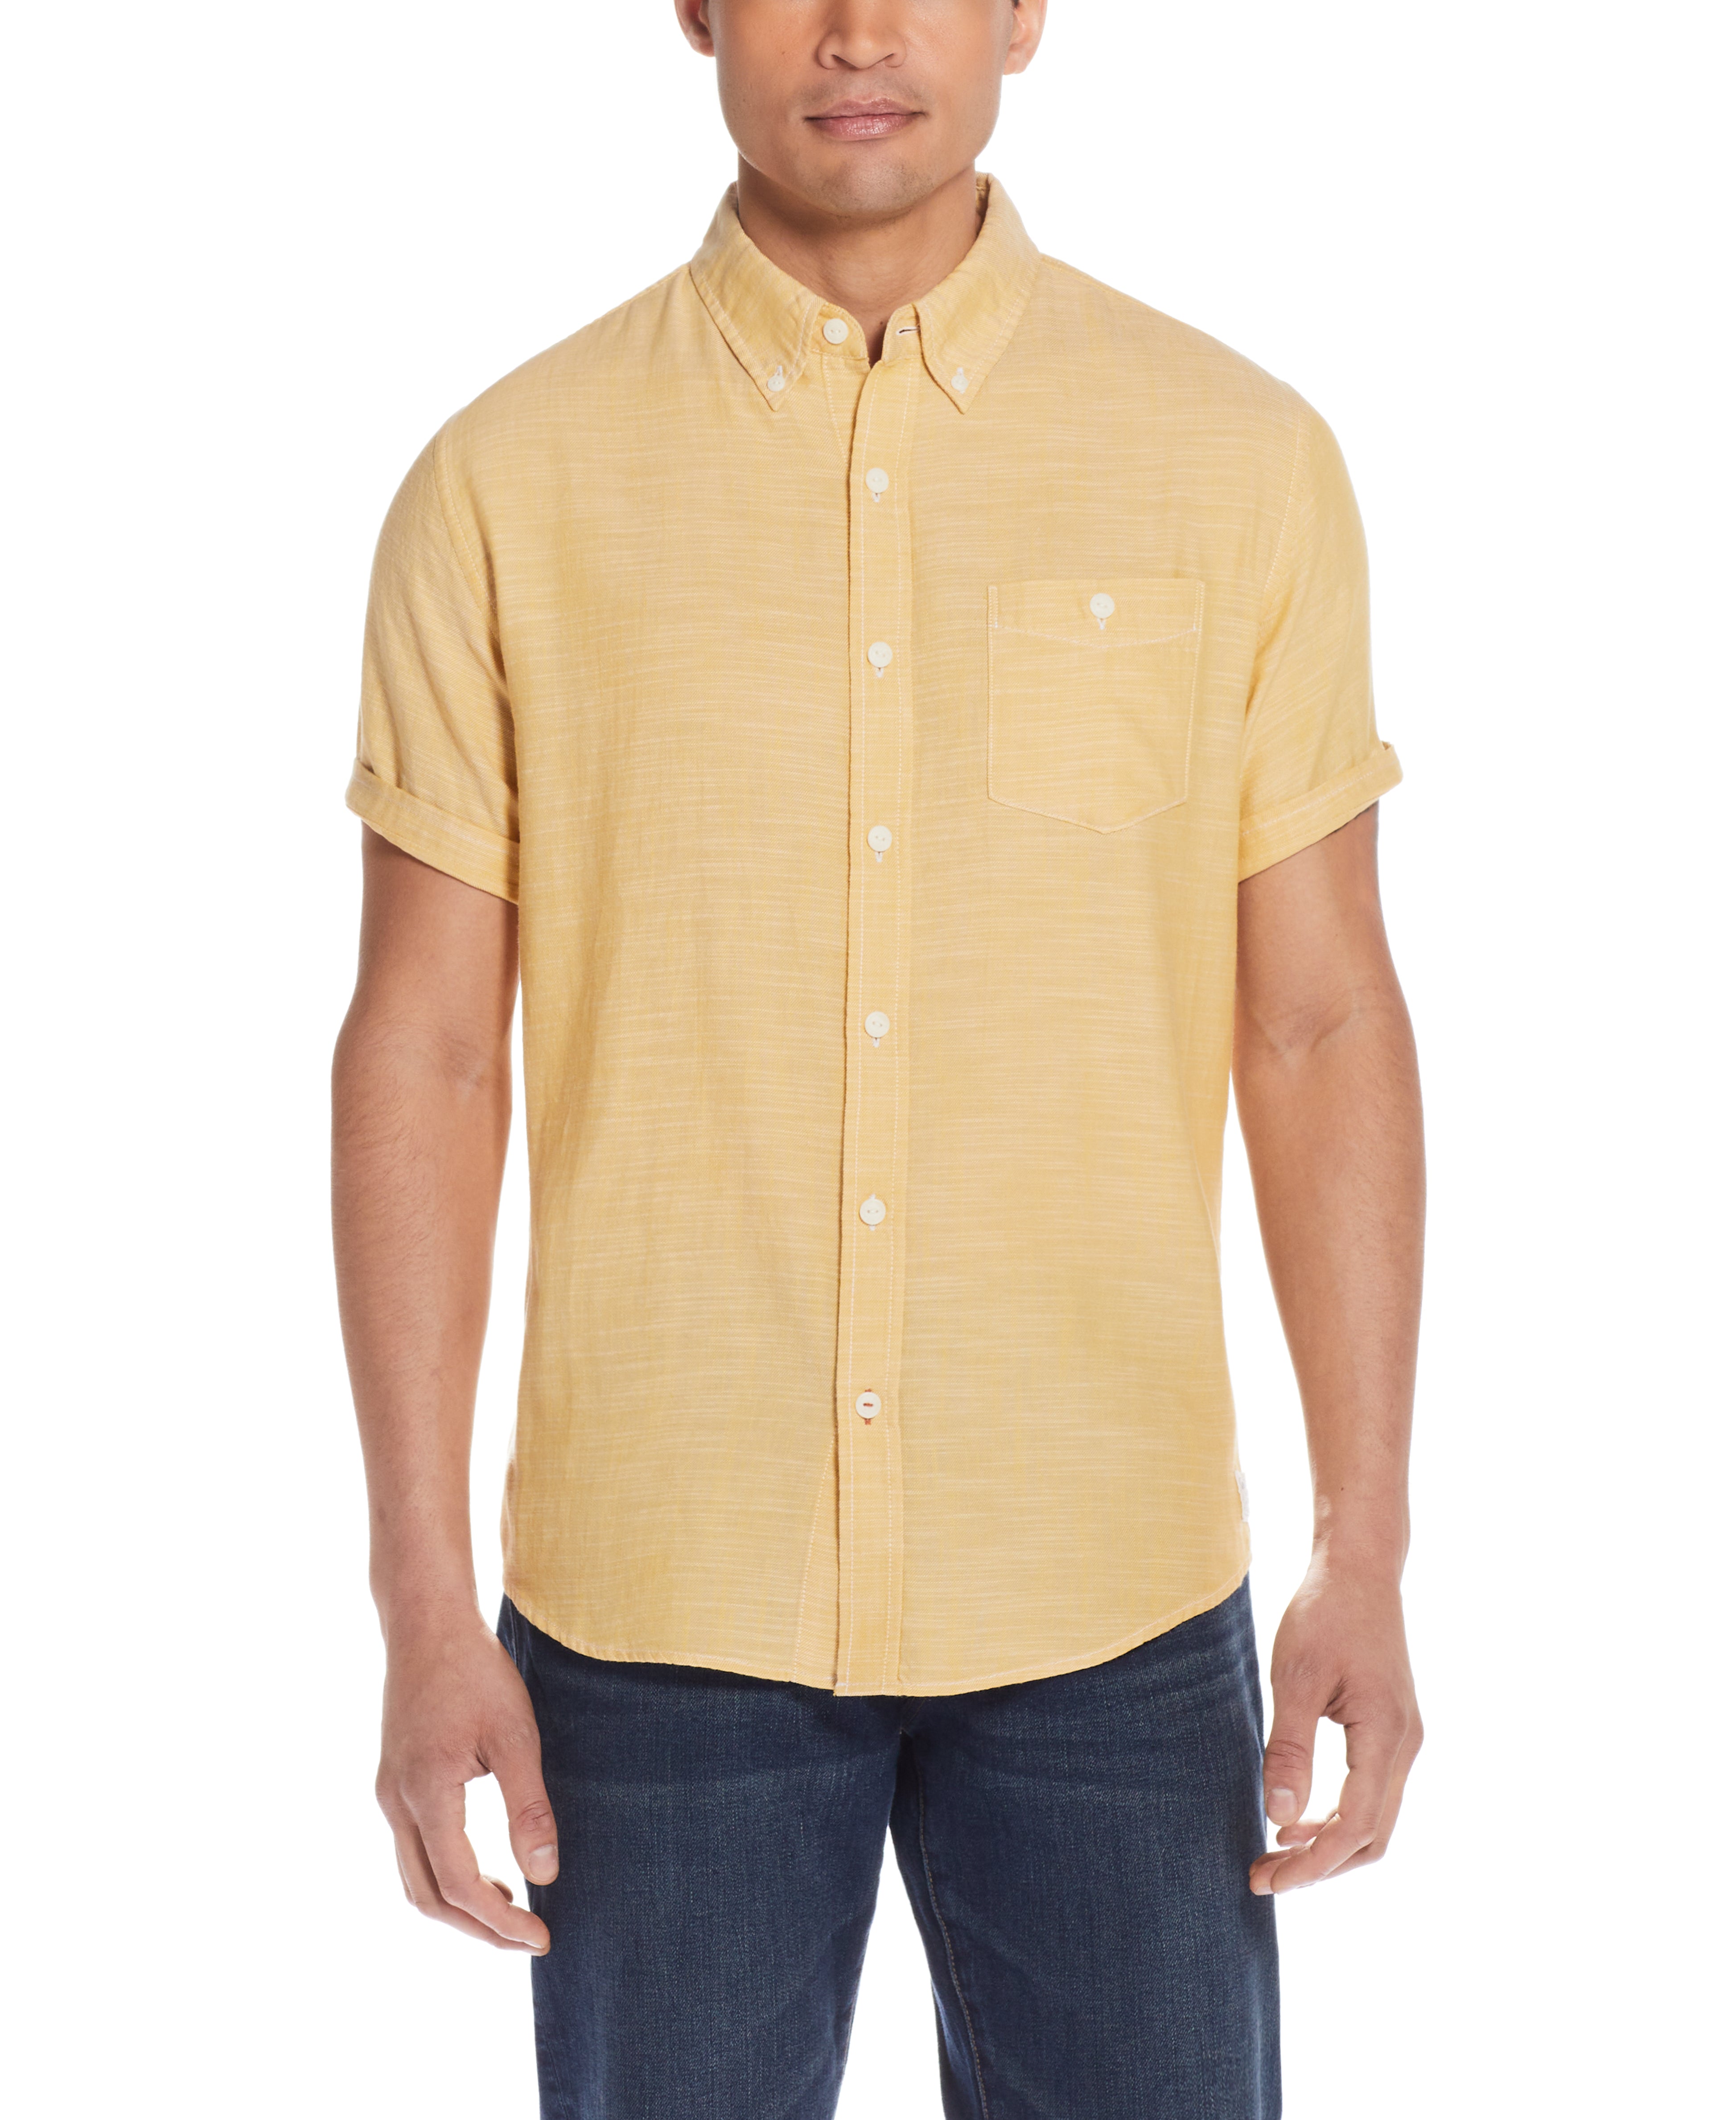 SOLID COUNTRY TWILL SHIRT IN SAUTERNE